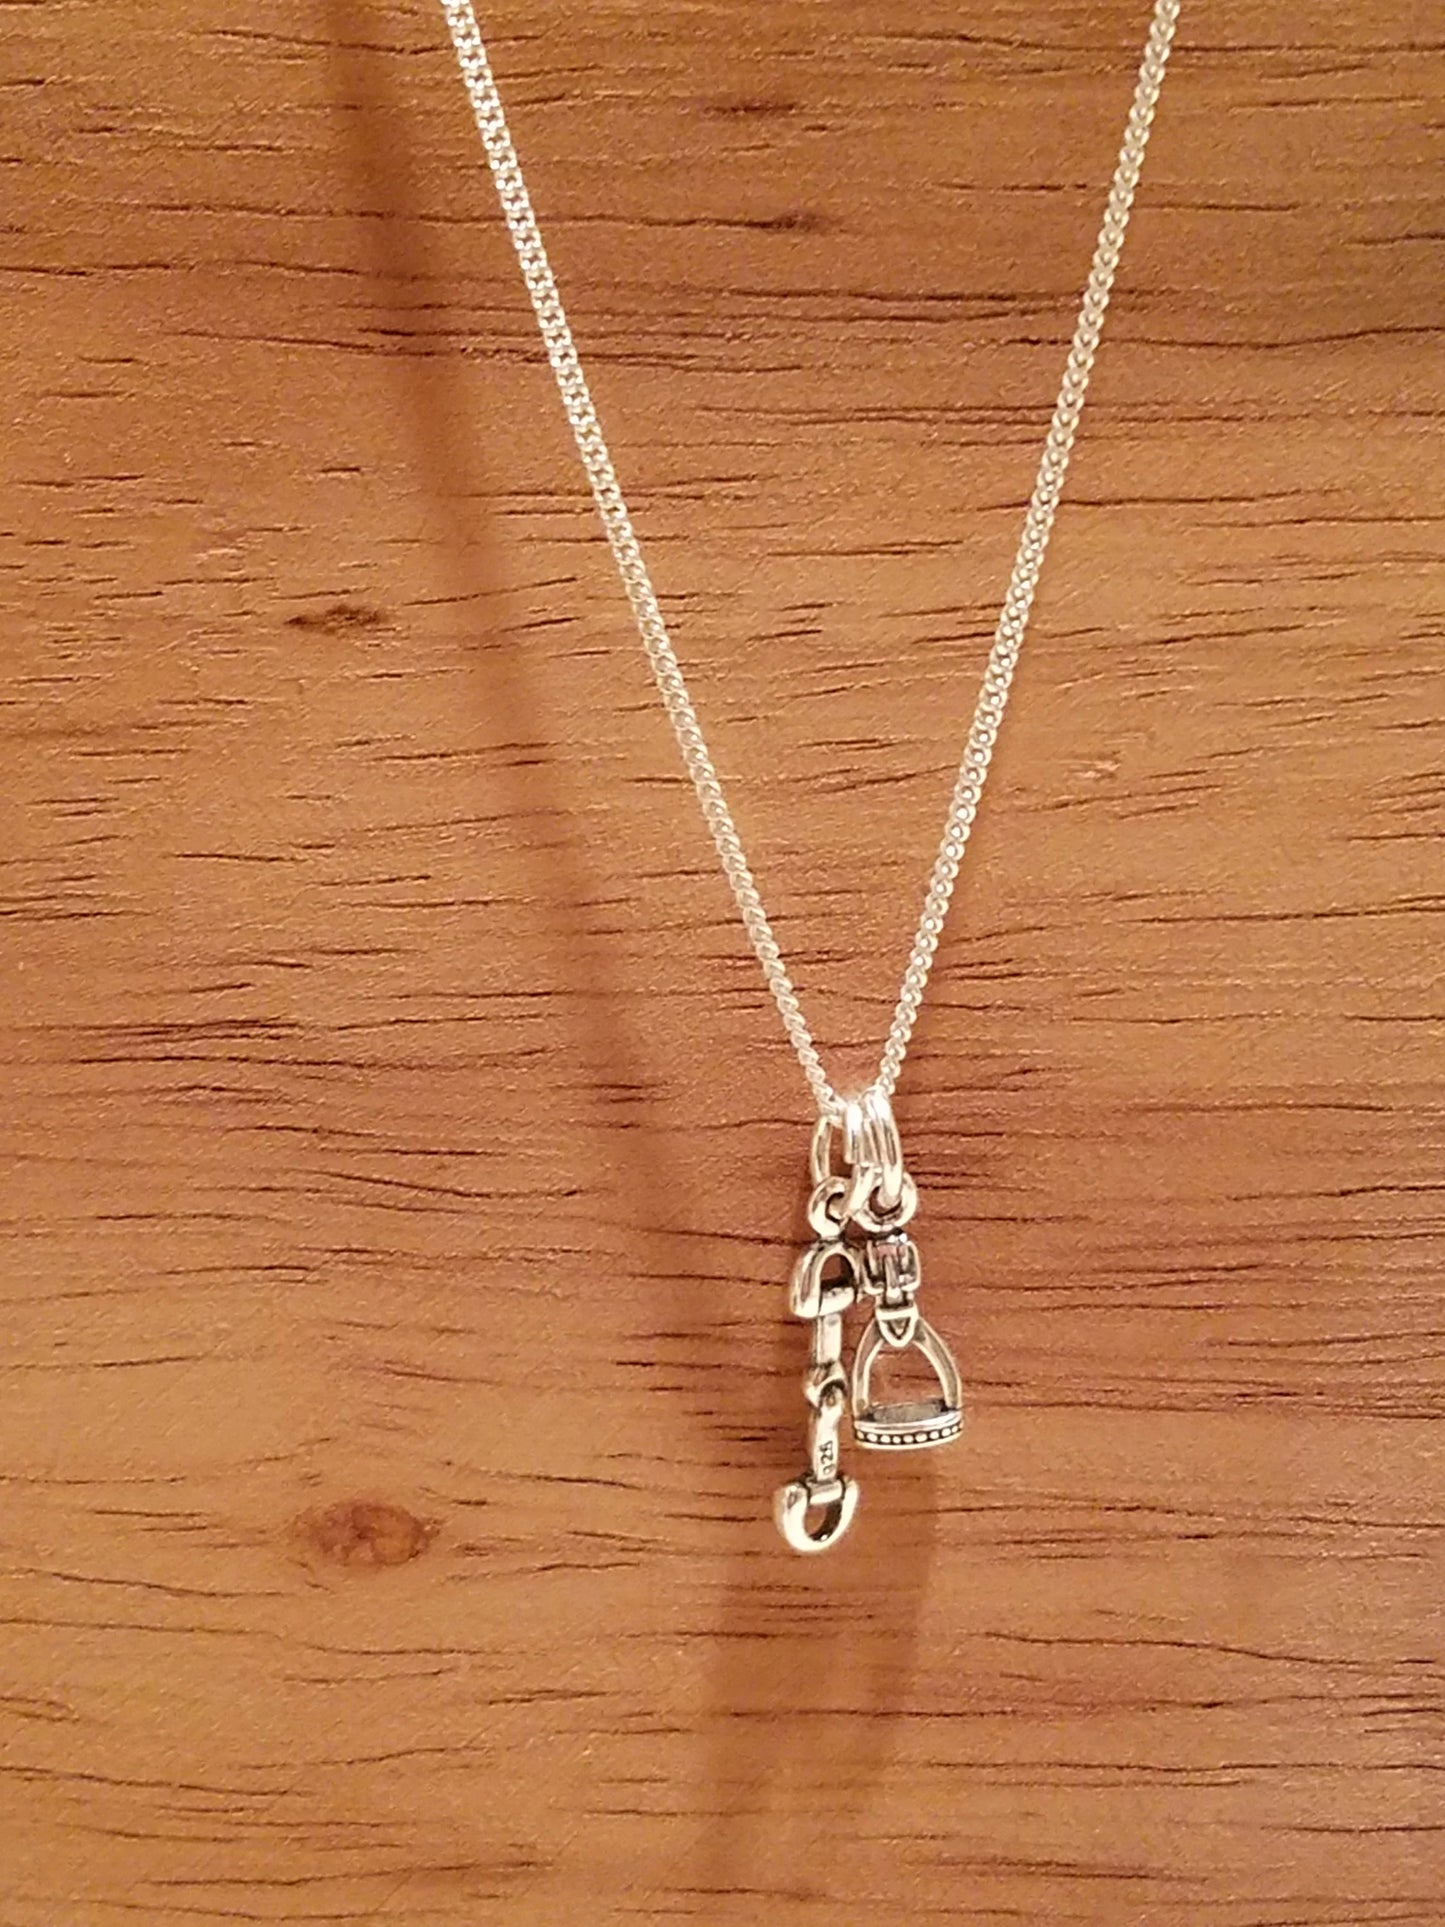 Sterling Silver Snaffle Bit and Stirrup Charm Necklace